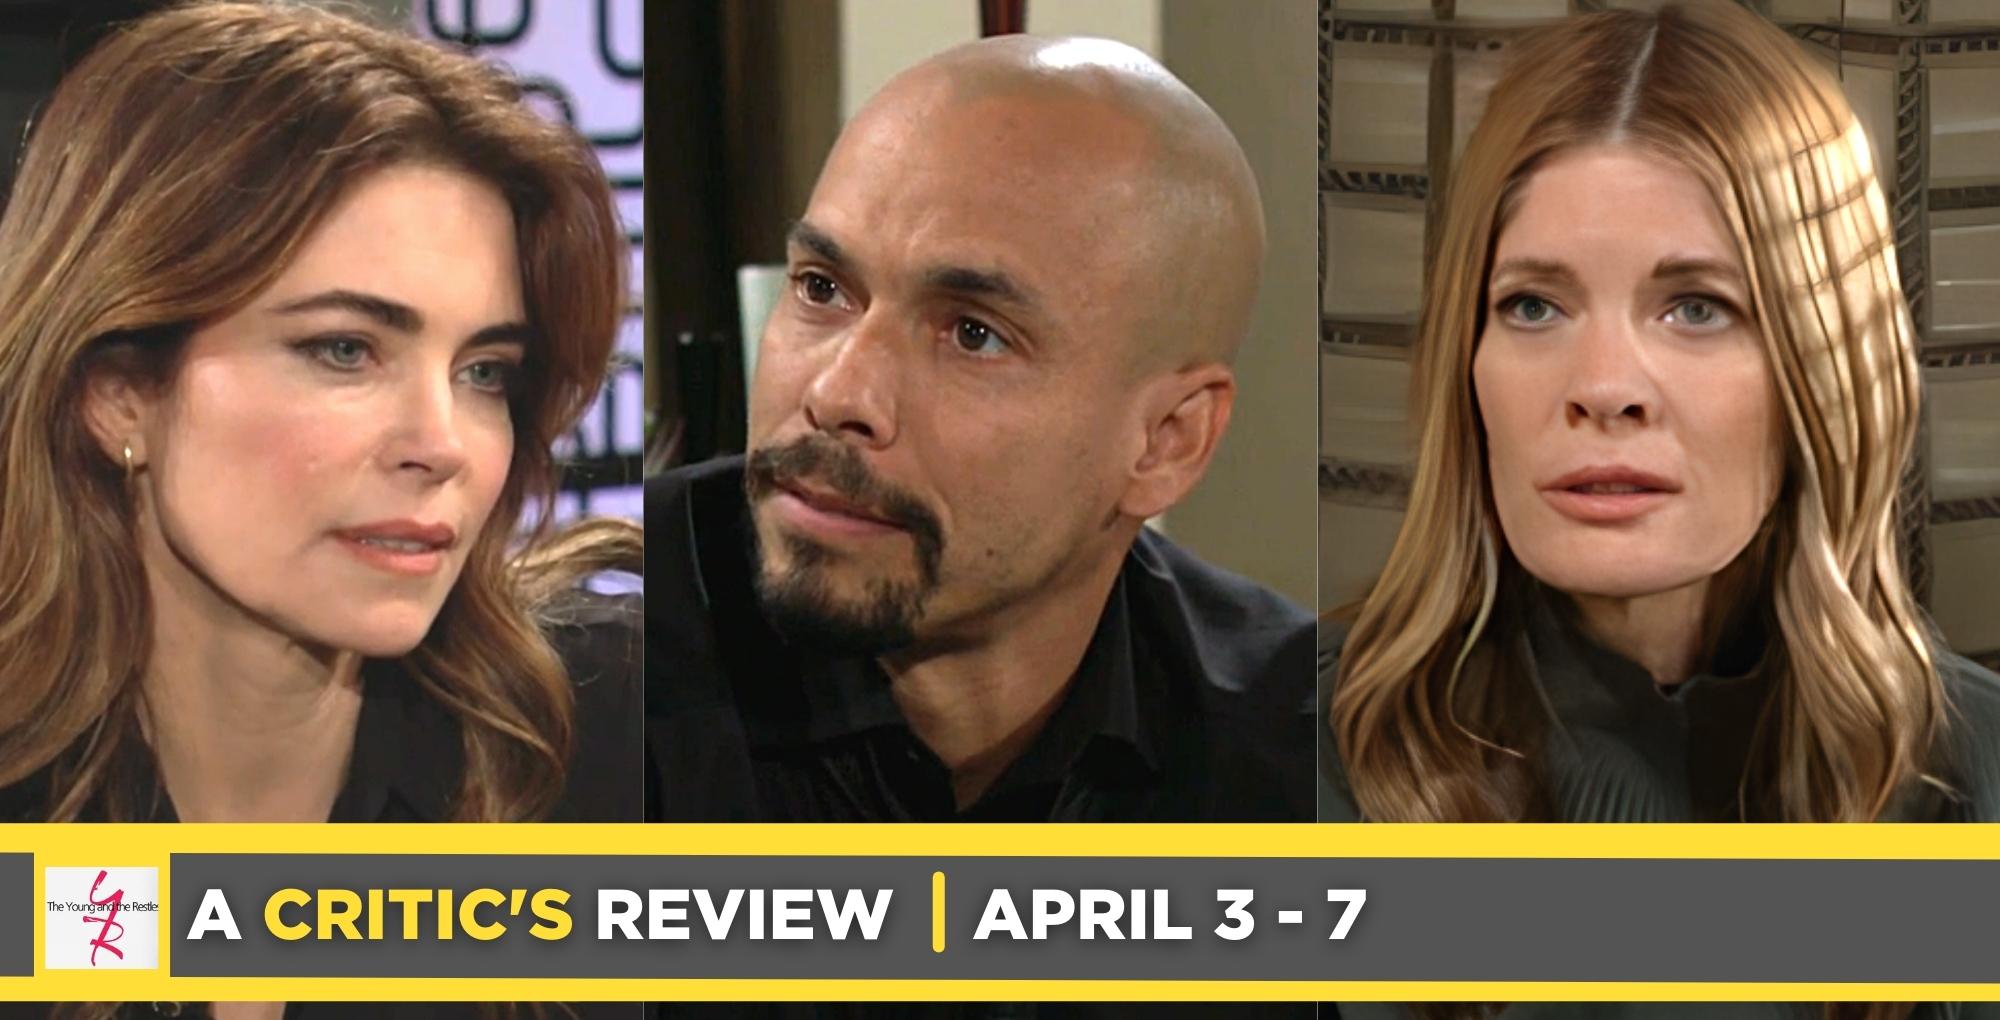 the young and the restless critic's review for april 3 – april 7, 2023, three images victoria, devon, and phyllis